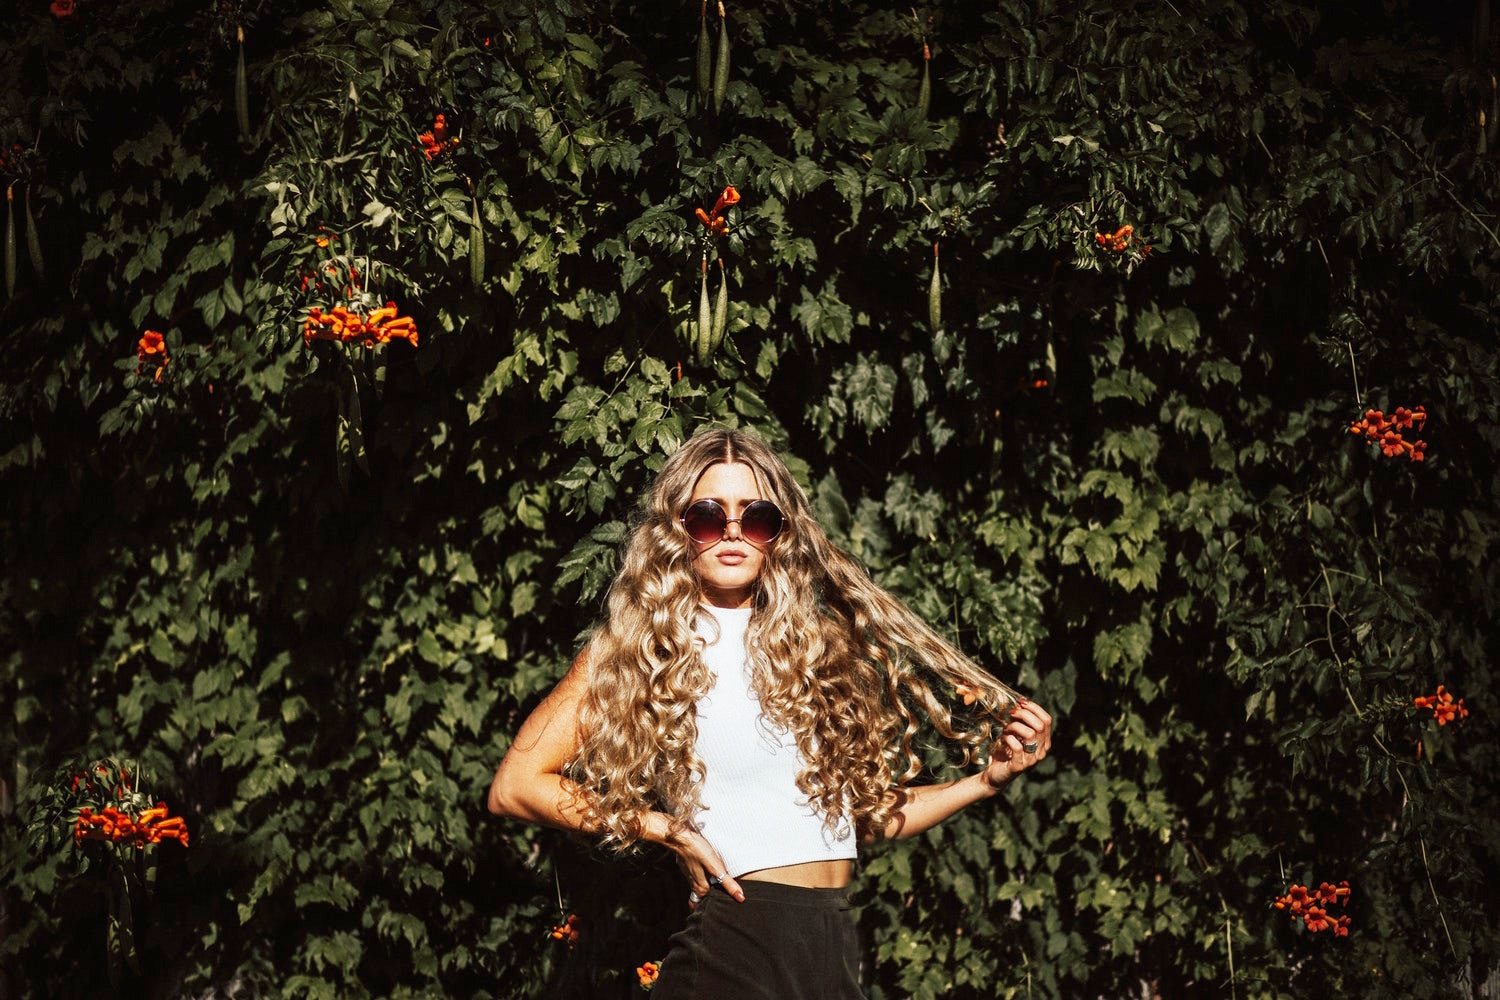 woman with a long, blonde and curly hair oisung in a garden